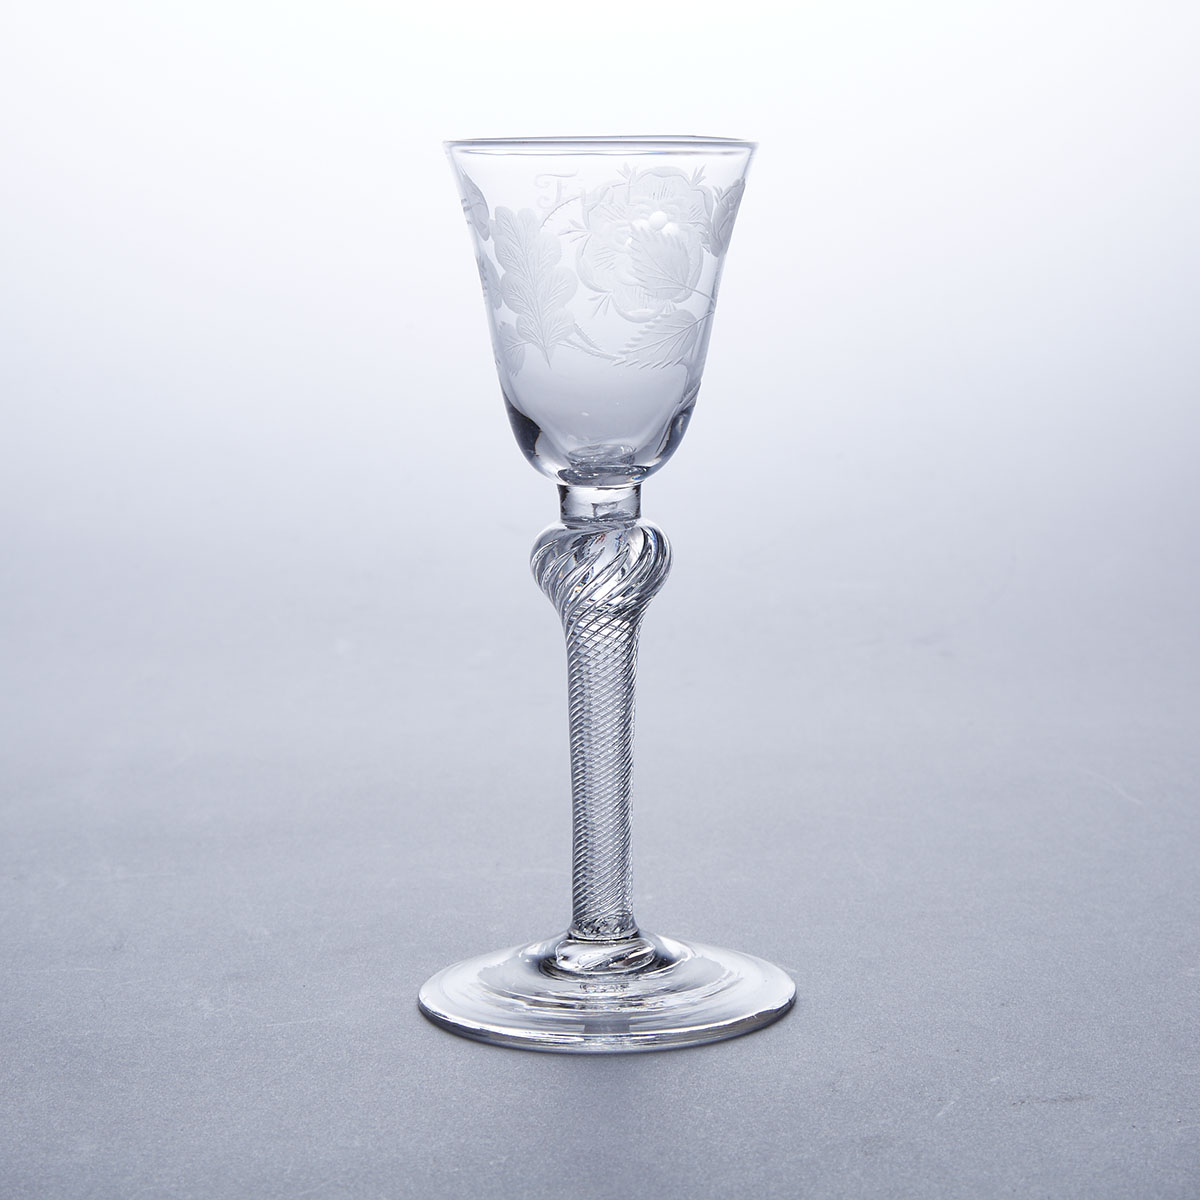 Jacobite Engraved Knopped Airtwist Stemmed Wine Glass, c.1750